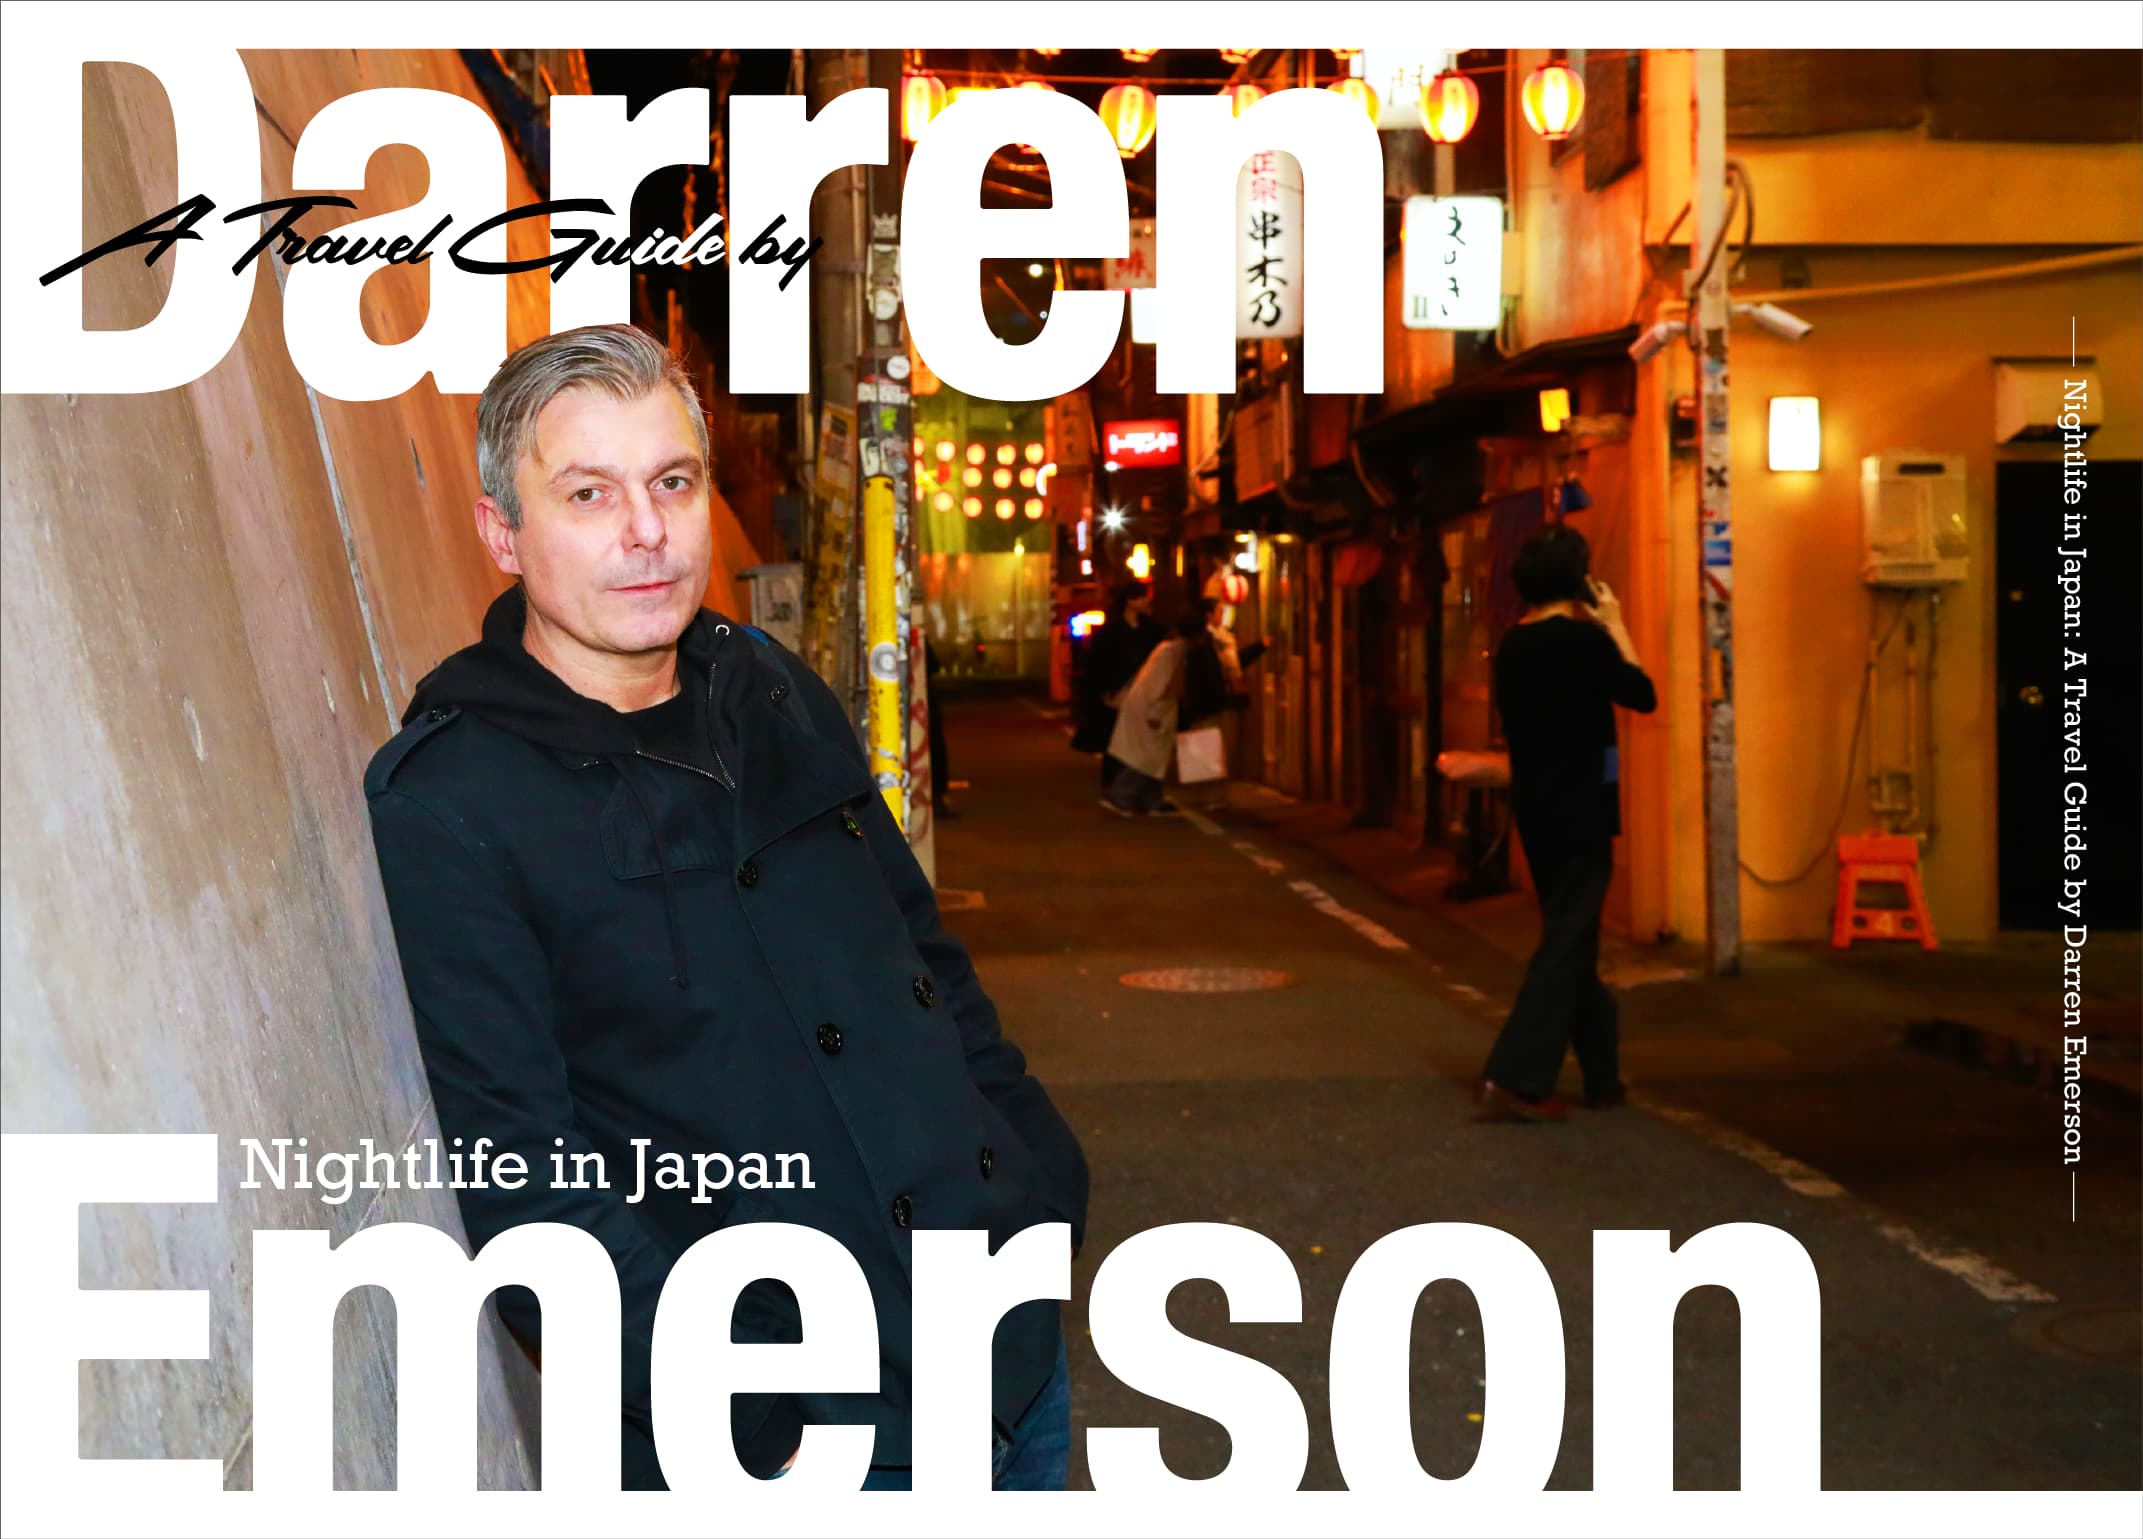 Nightlife in Japan: A Travel Guide by Darren Emerson